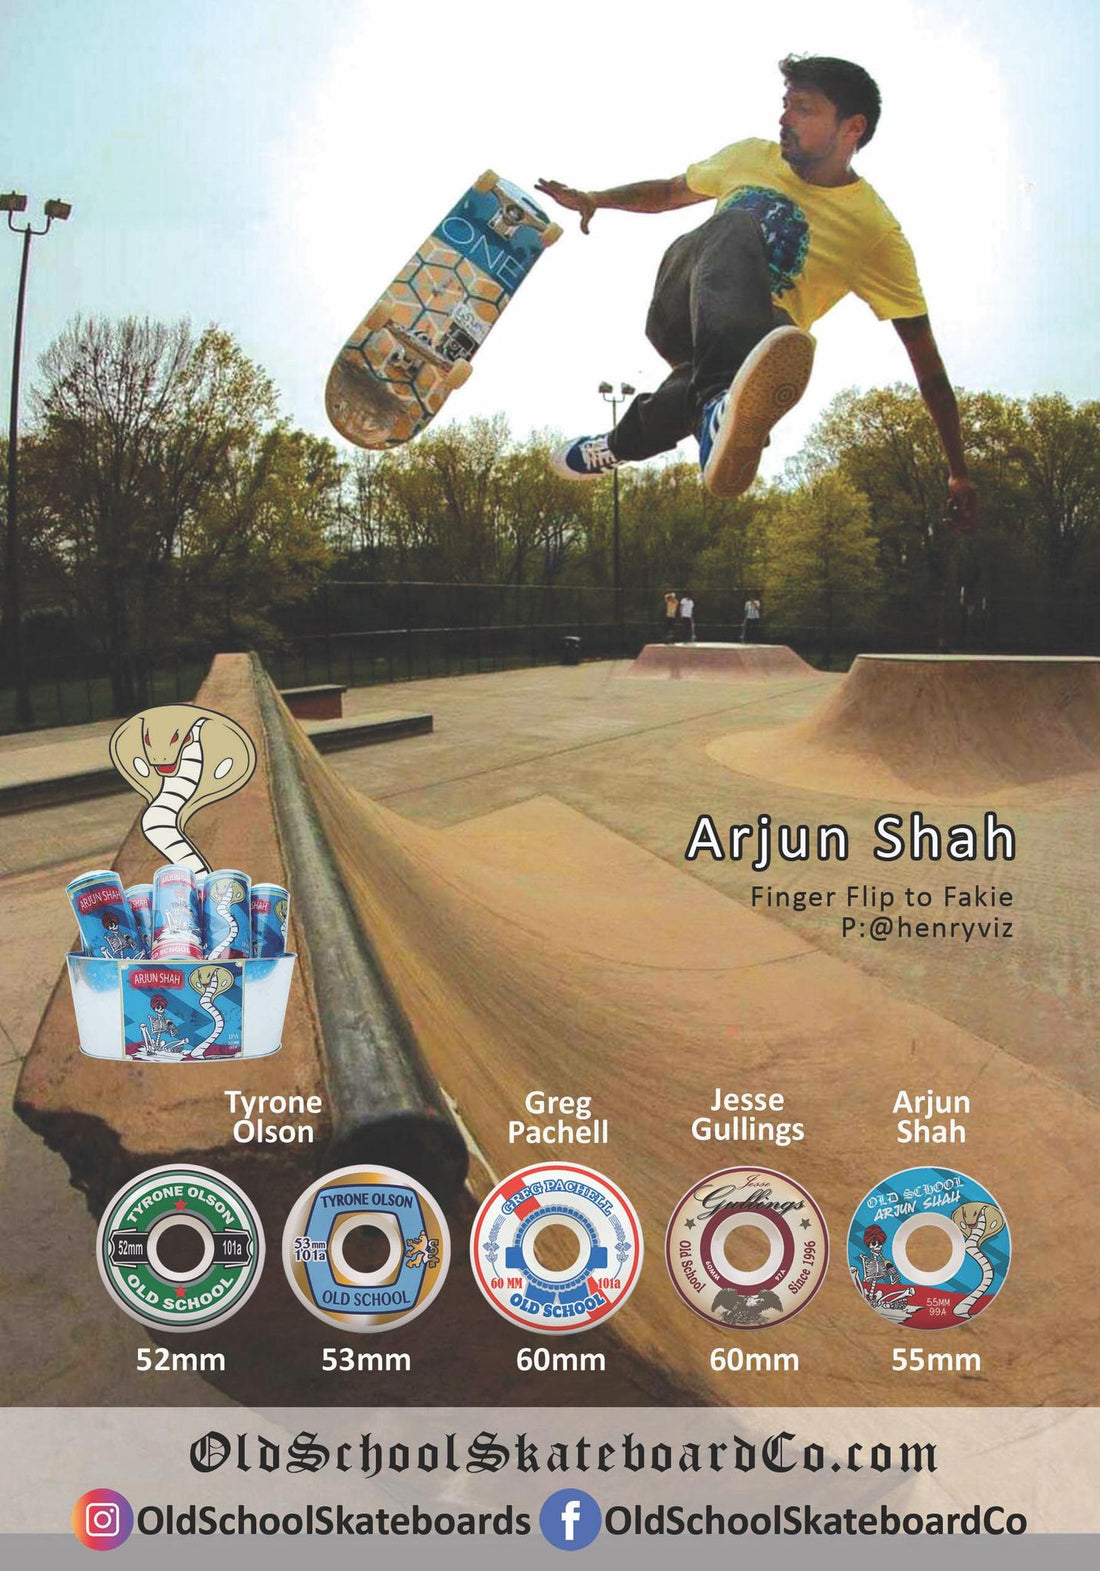 Check out Arjun Shah on Confusion Magazine's new issue!